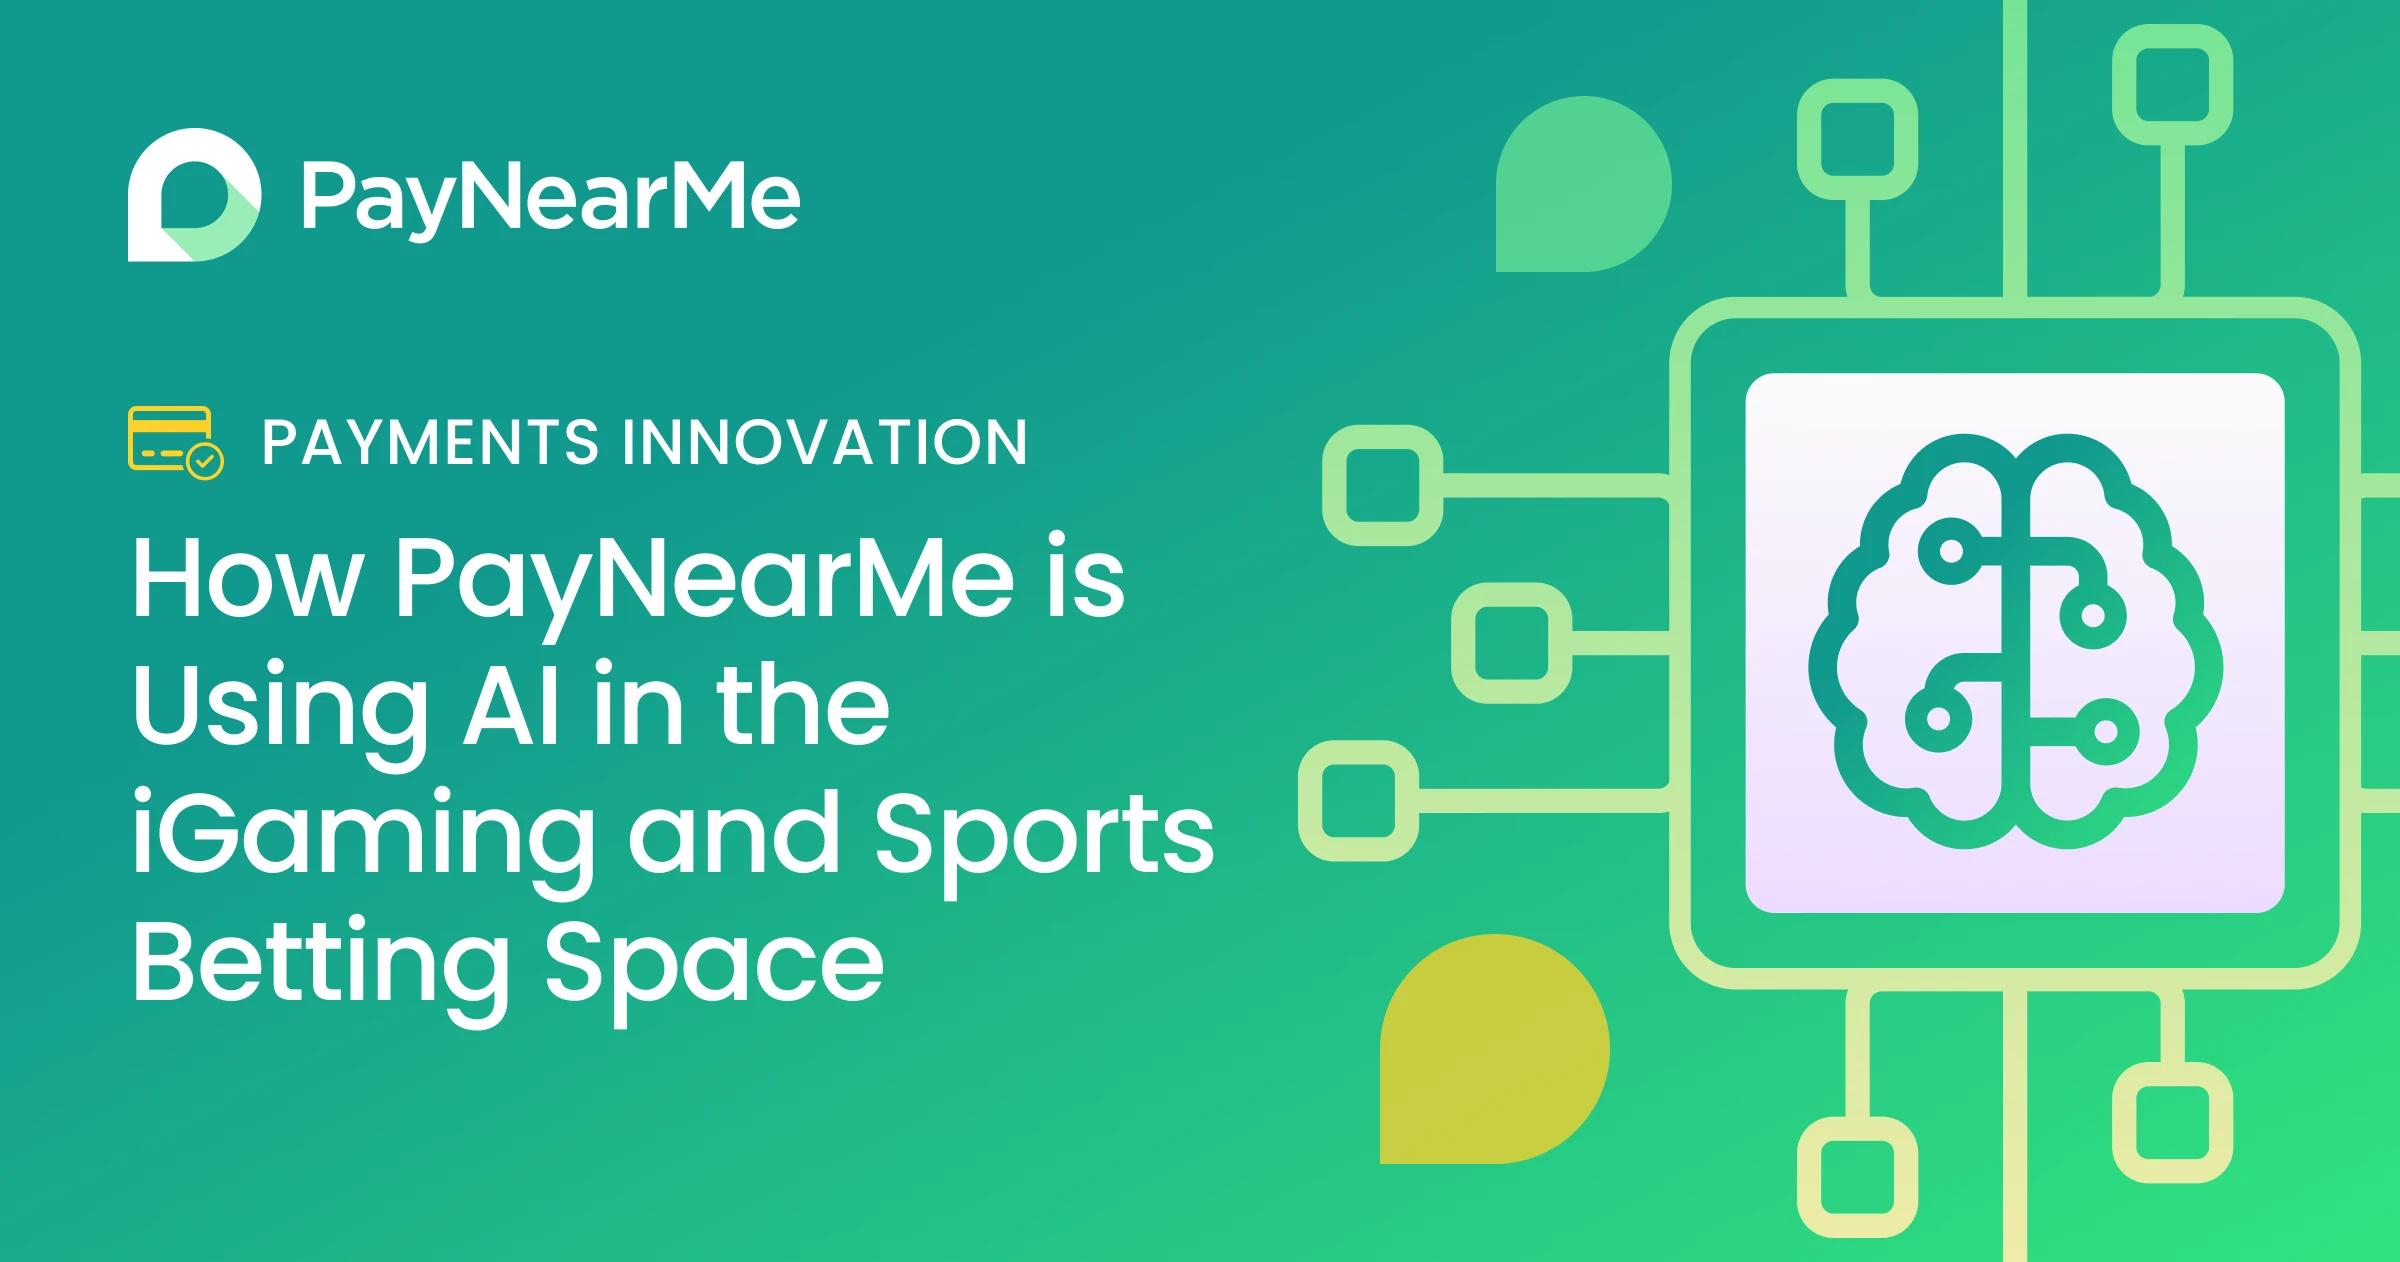 How PayNearMe is Using AI in the iGaming and Sports Betting Space